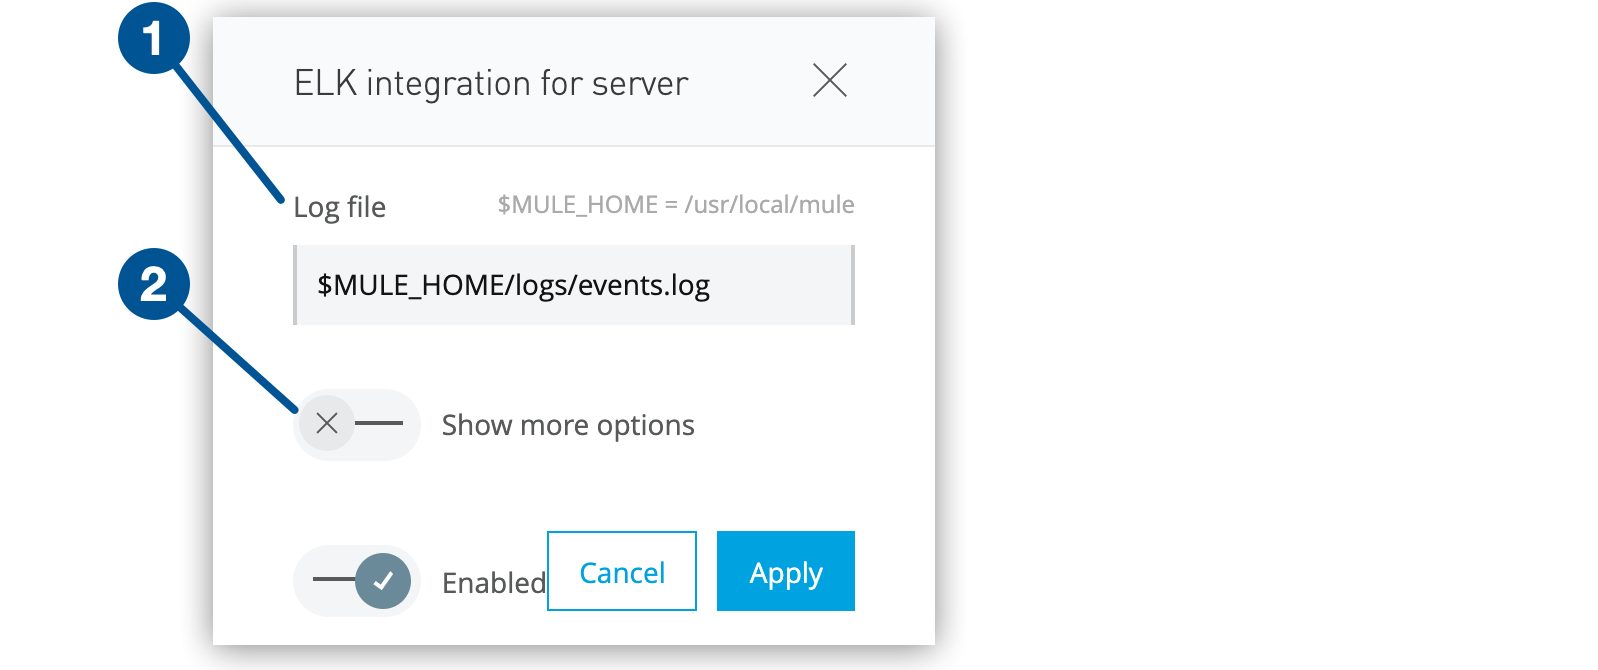 Log file location and Show more options switch in the ELK configuration window